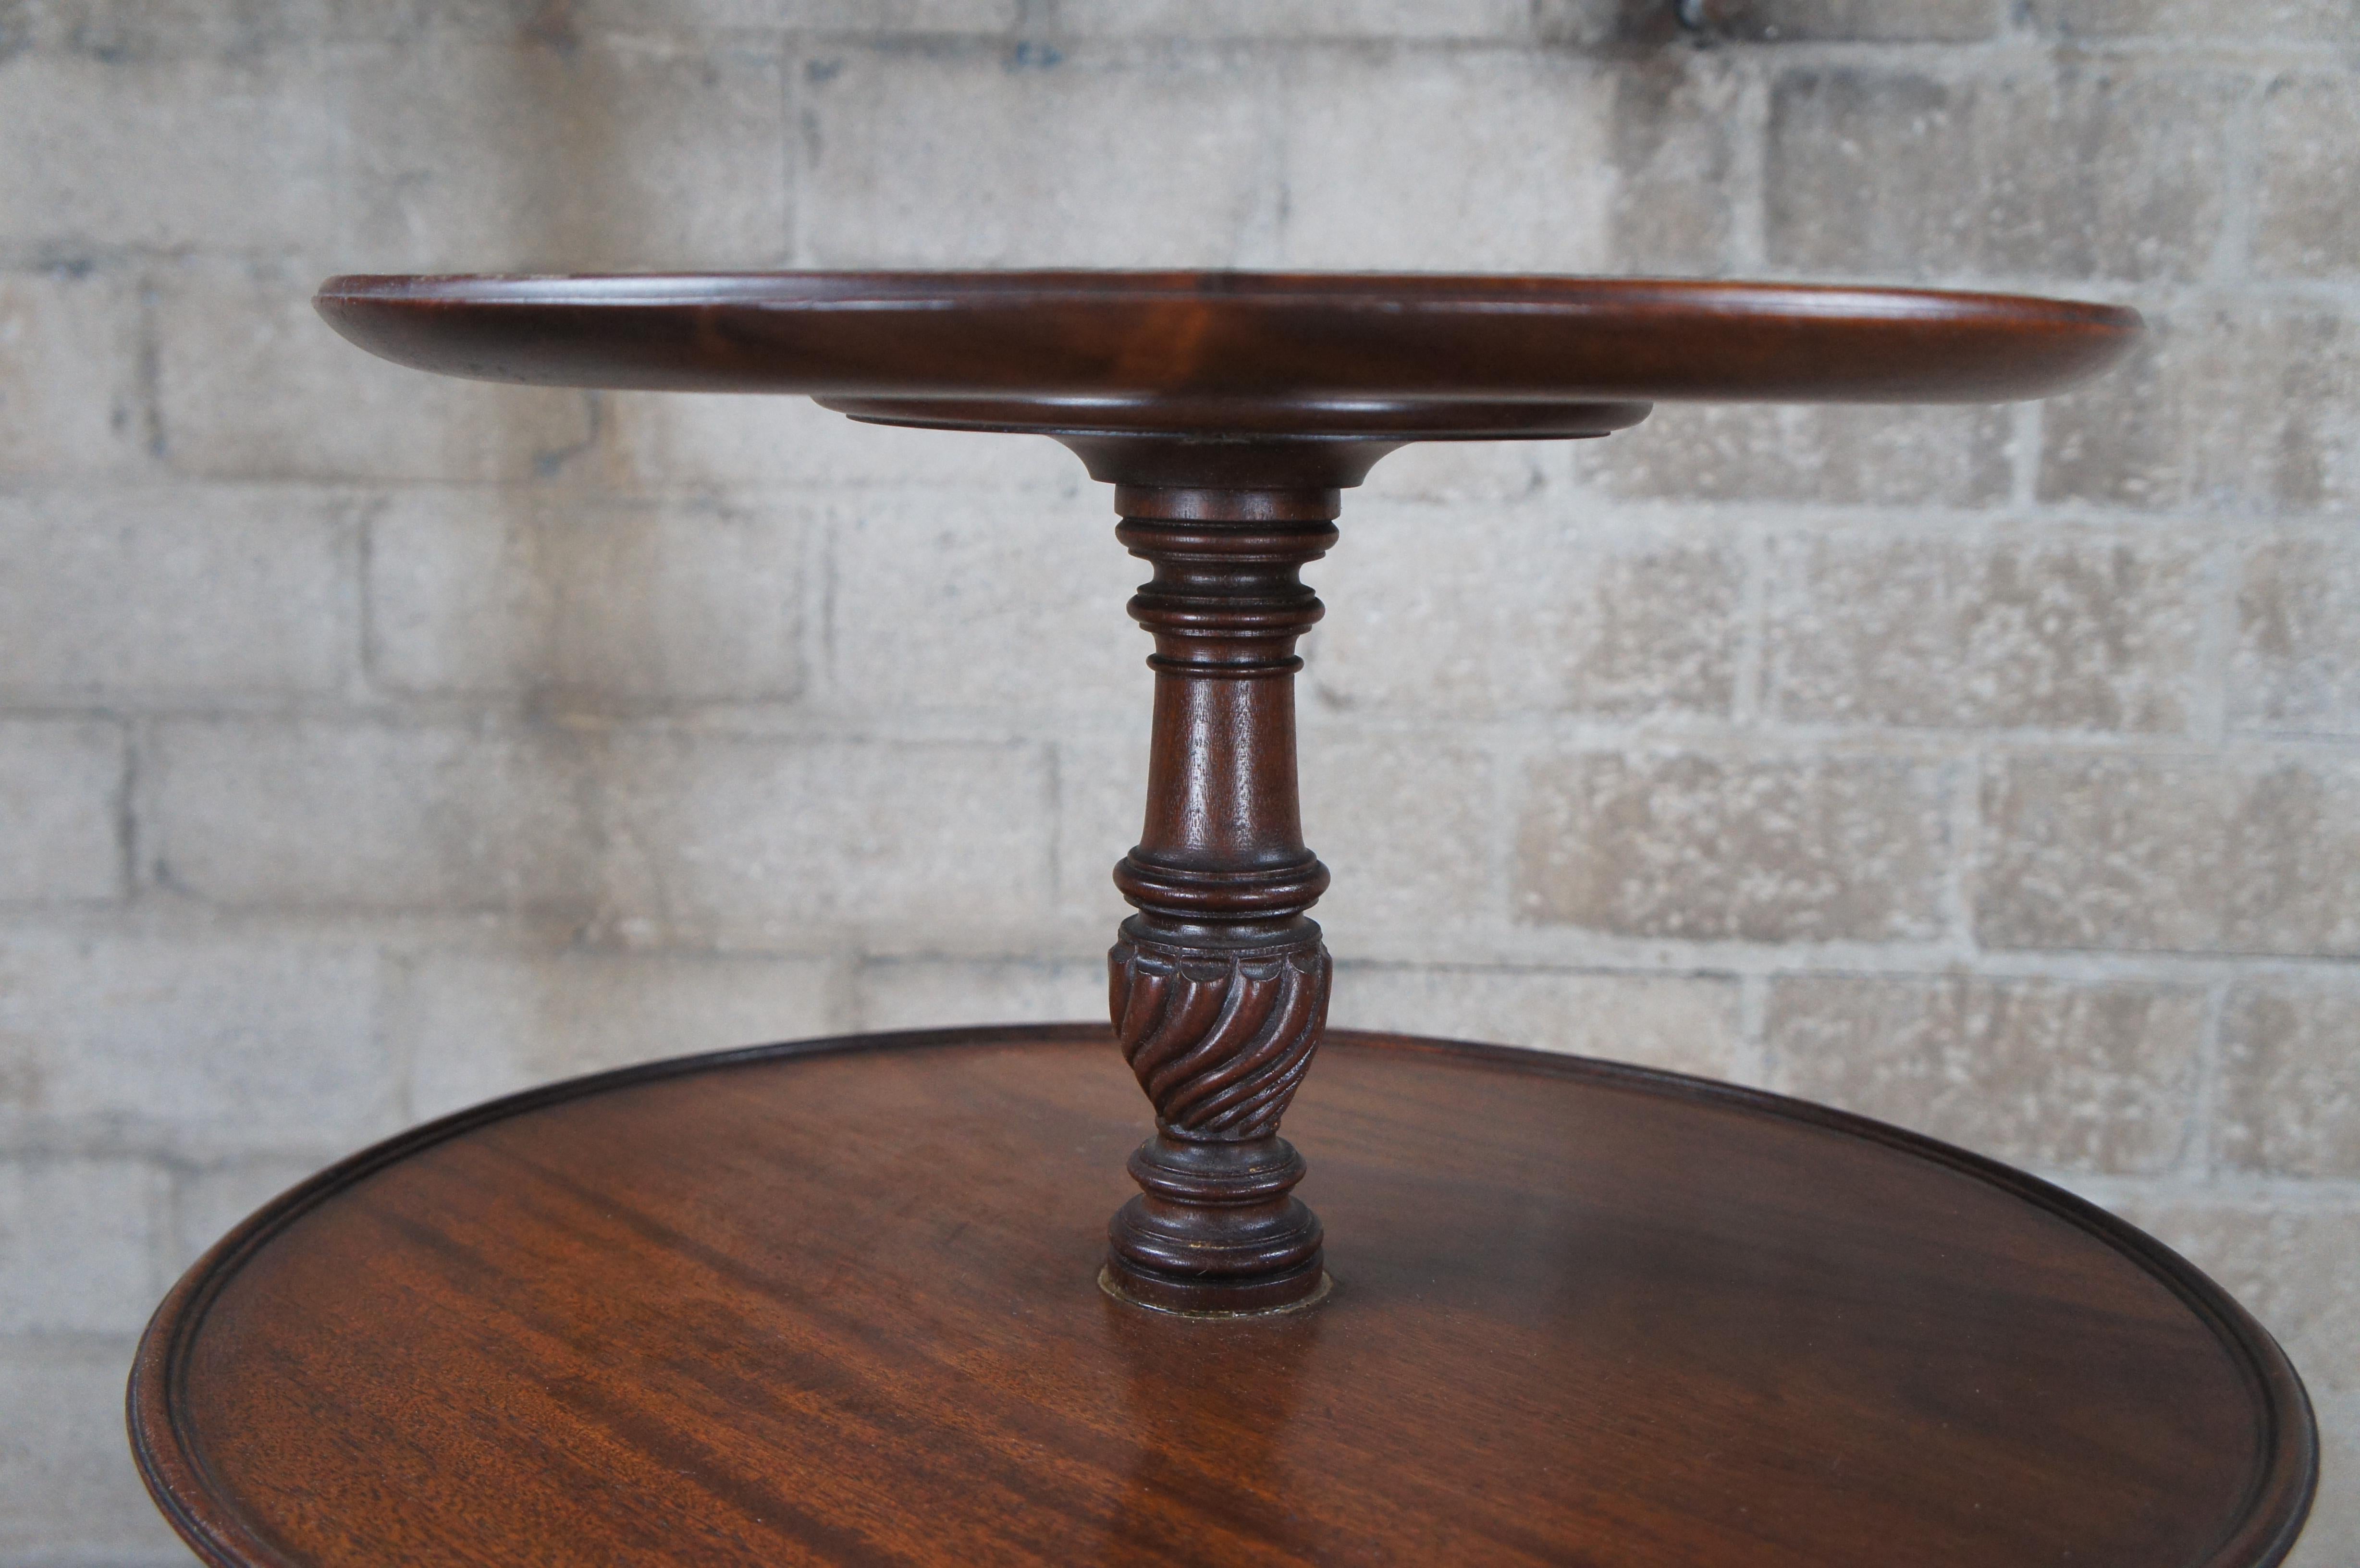 English Georgian Solid Mahogany 3 Tier Dumbwaiter Table Butler Pedestal Table For Sale 1